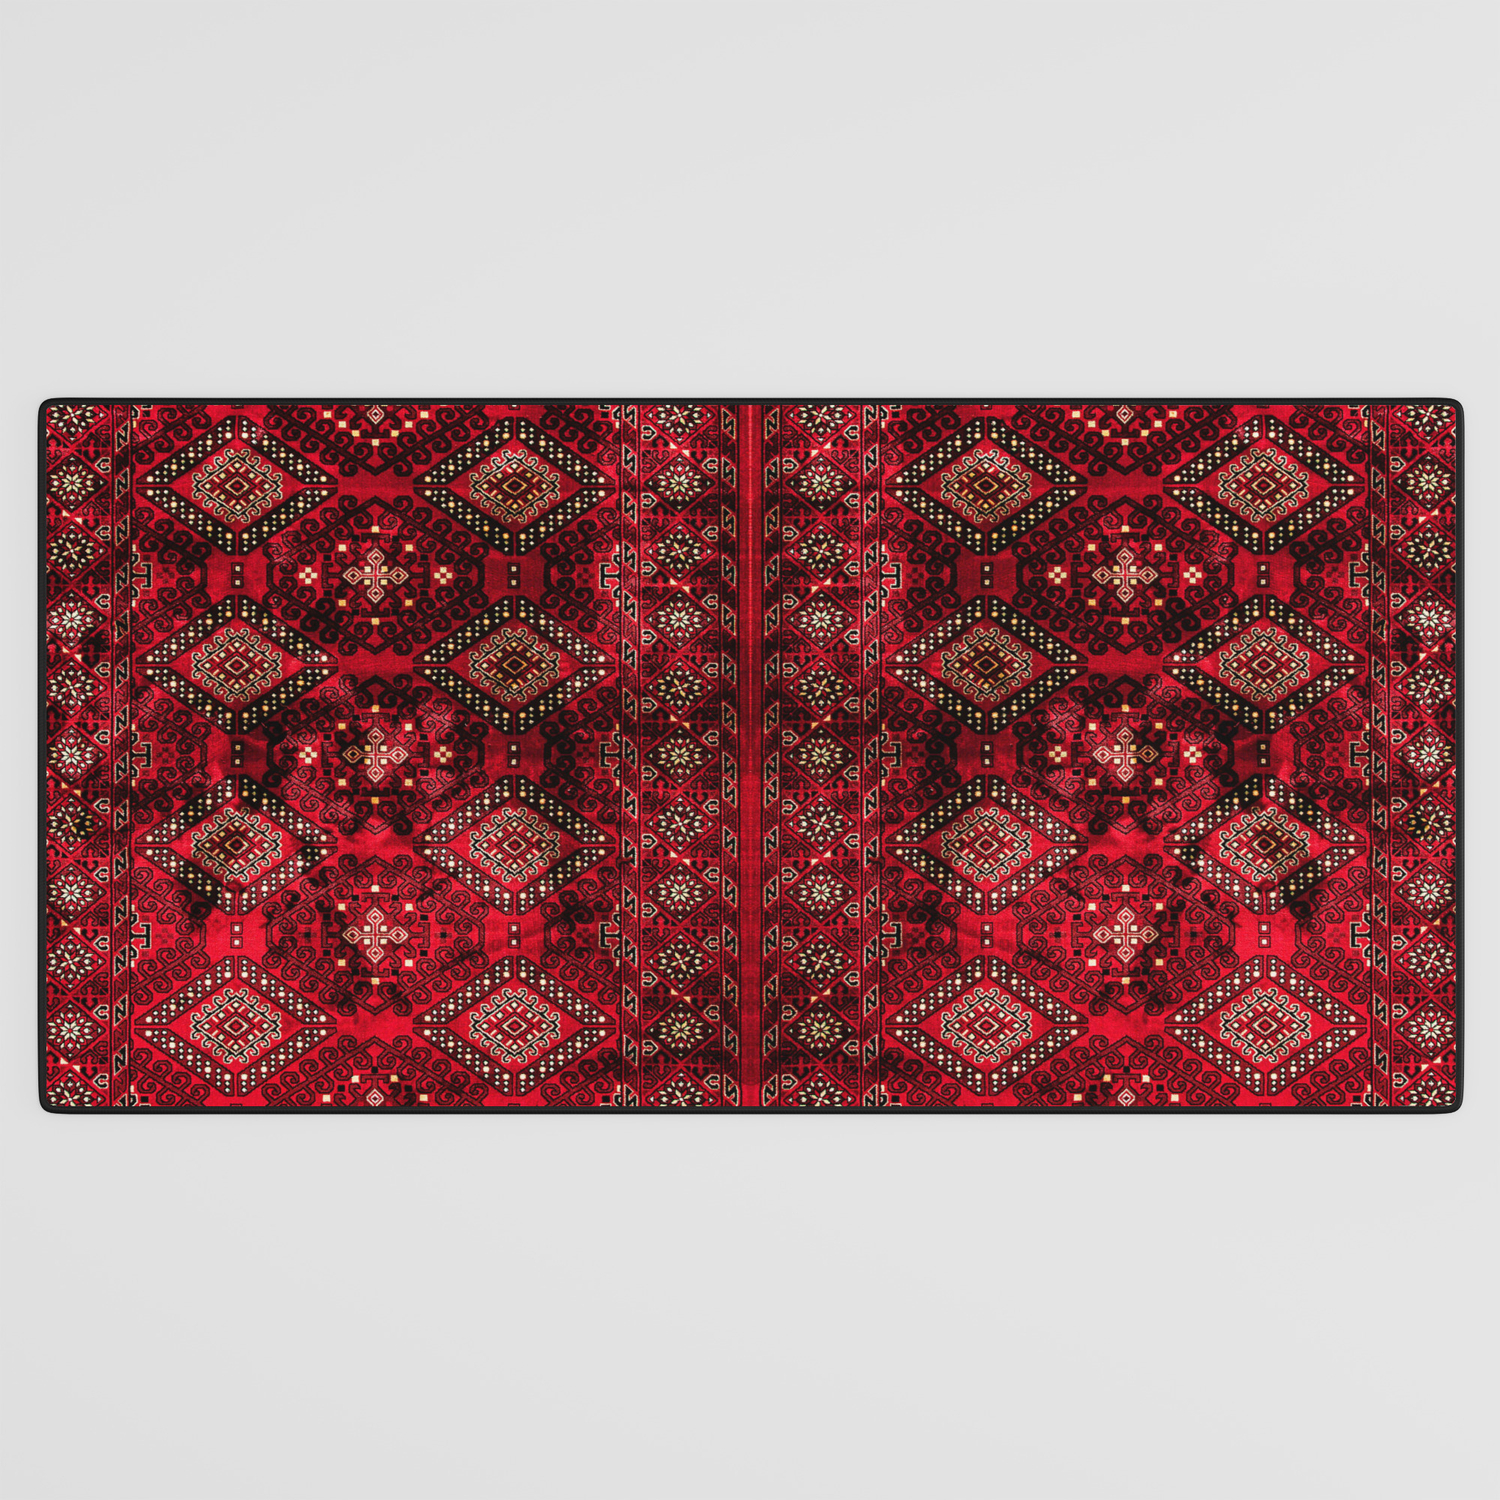 Epic Royal Red Oriental Traditional Moroccan Style Fabric Design by Arteresting Bazaar on Society6 N129 